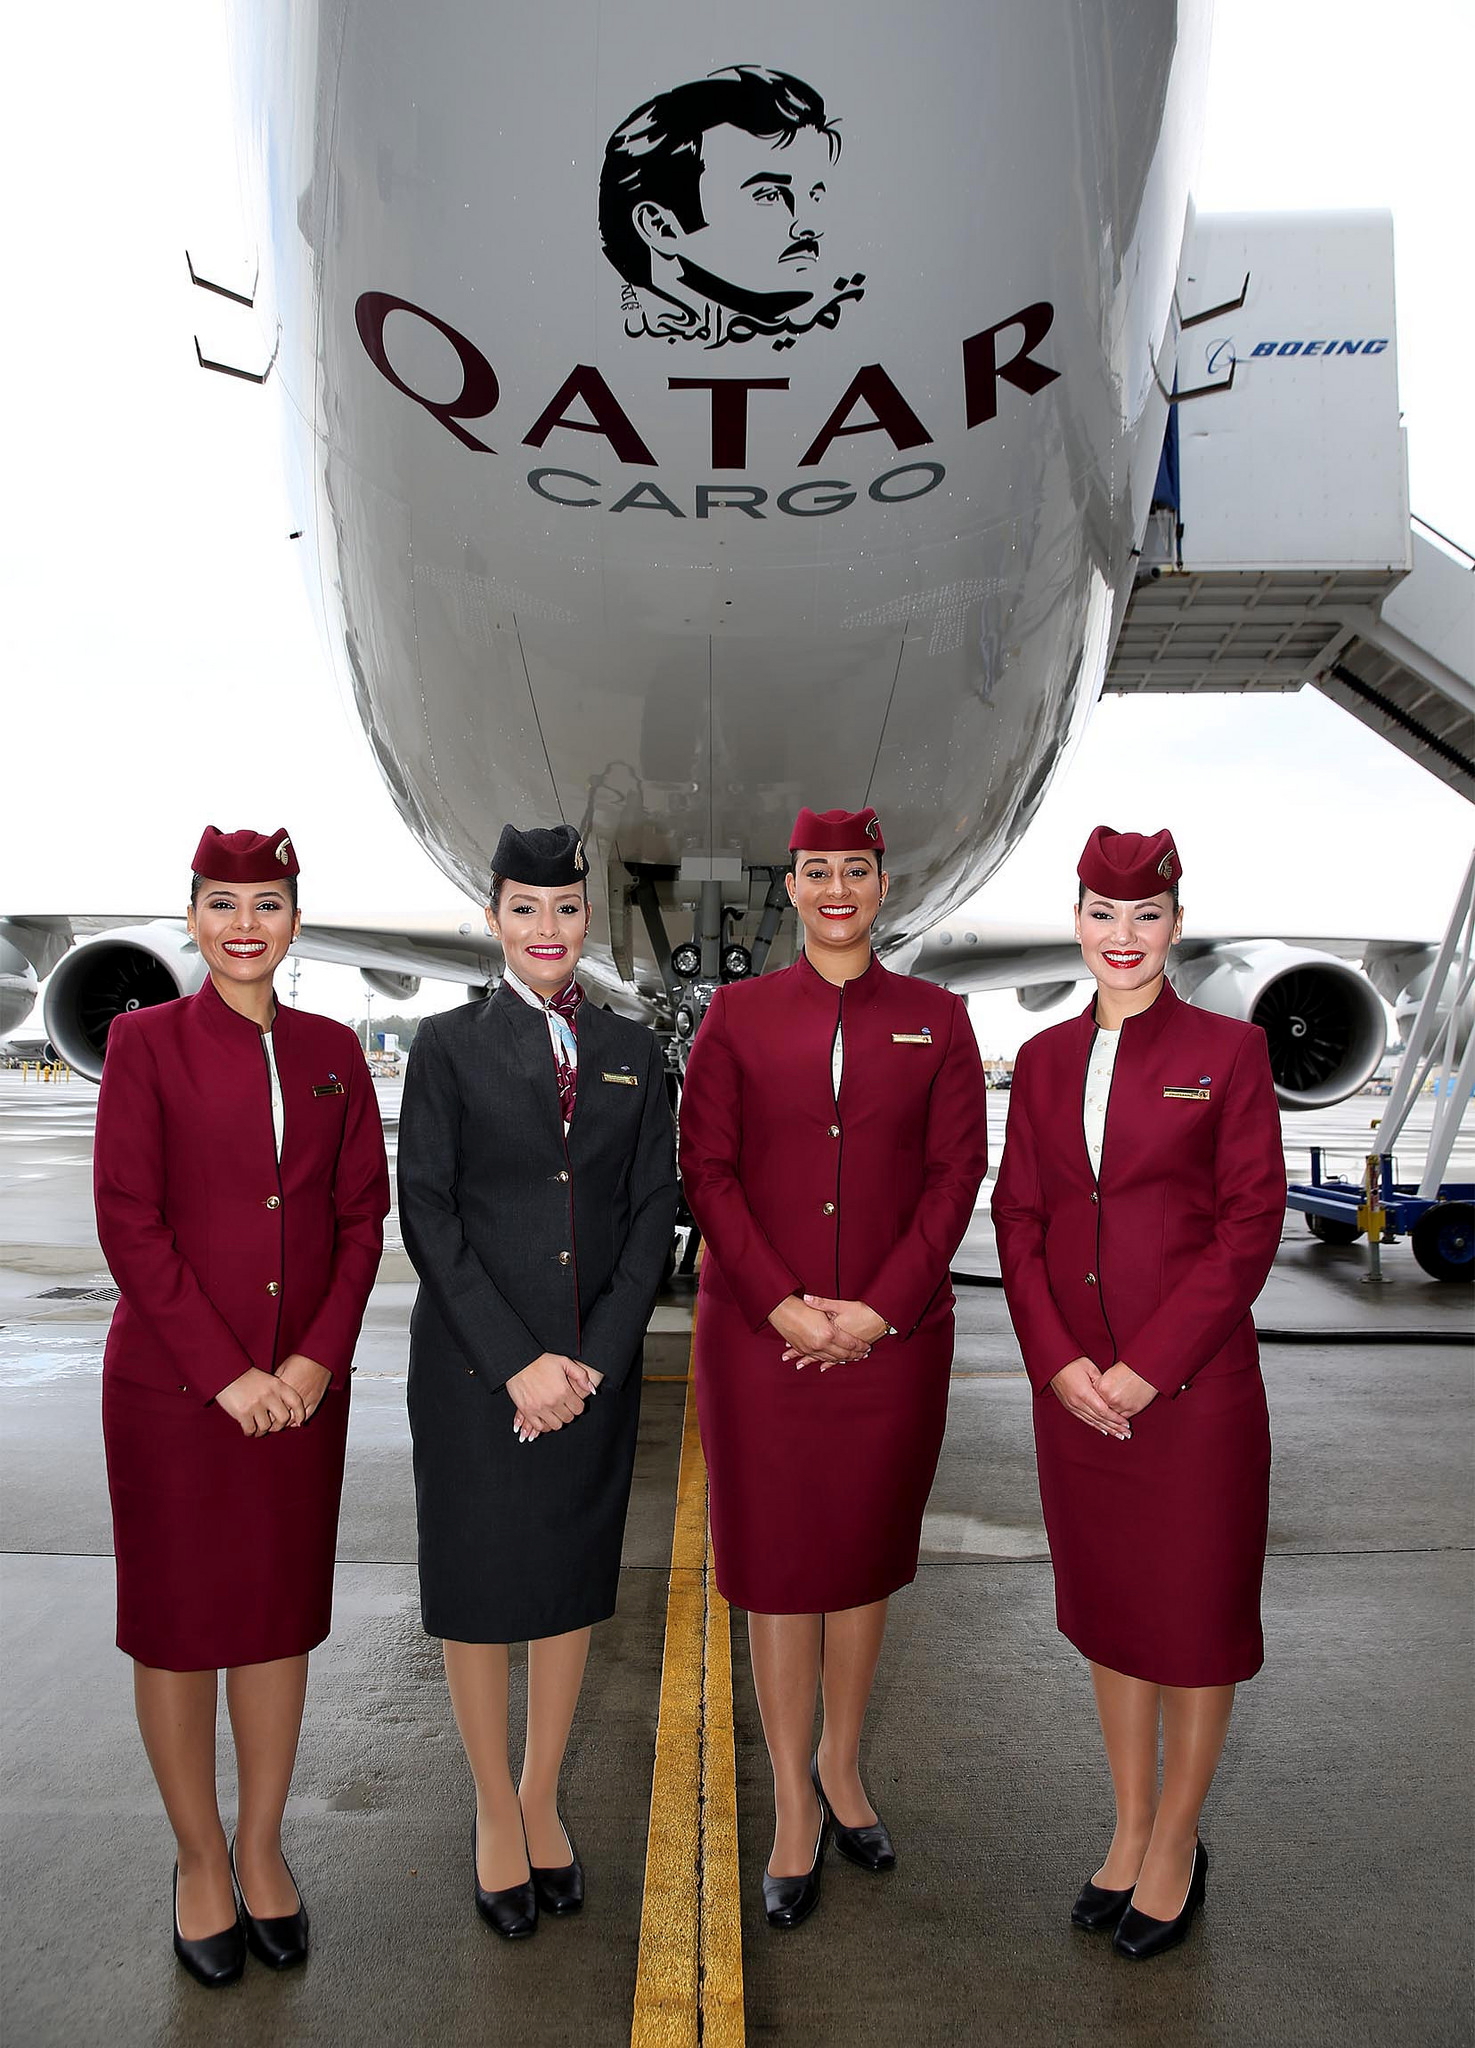 Qatar Airways Cargo taking delivery of its first Boeing 747-8F. Click to enlarge.